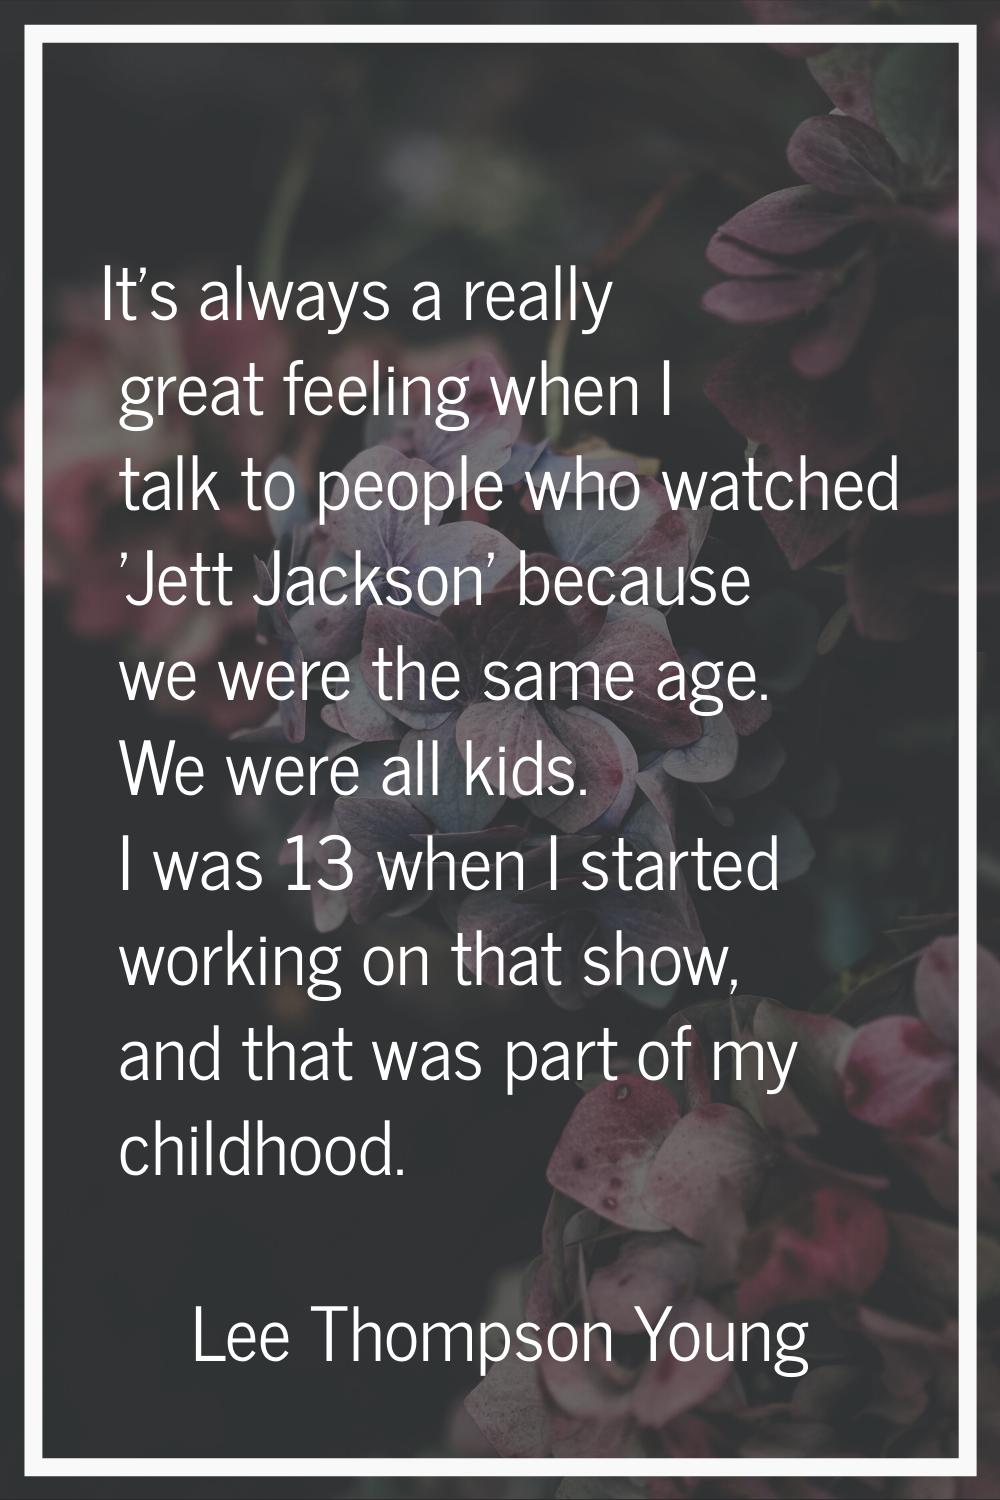 It's always a really great feeling when I talk to people who watched 'Jett Jackson' because we were